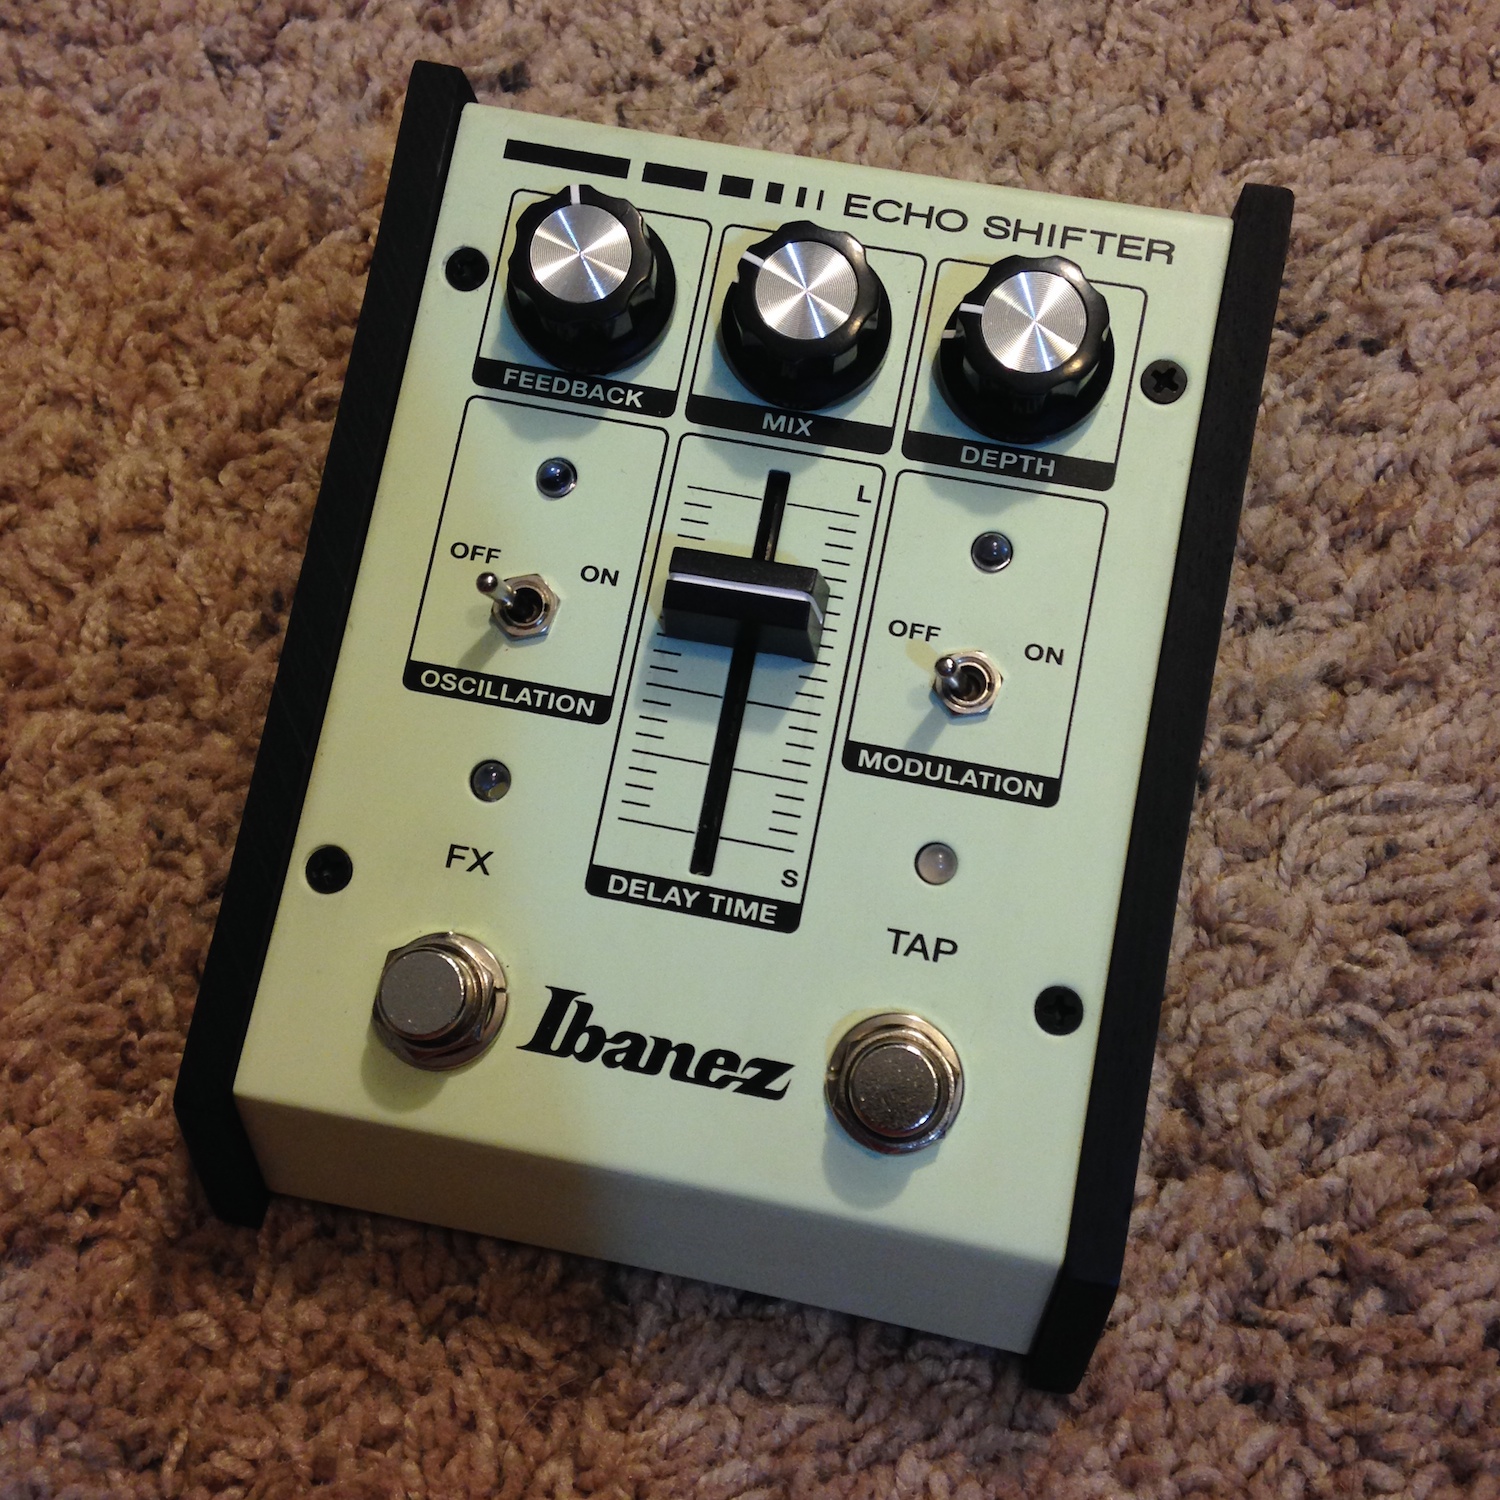 Ibanez ES2 Echo Shifter Analog Delay - Pedal of the Day